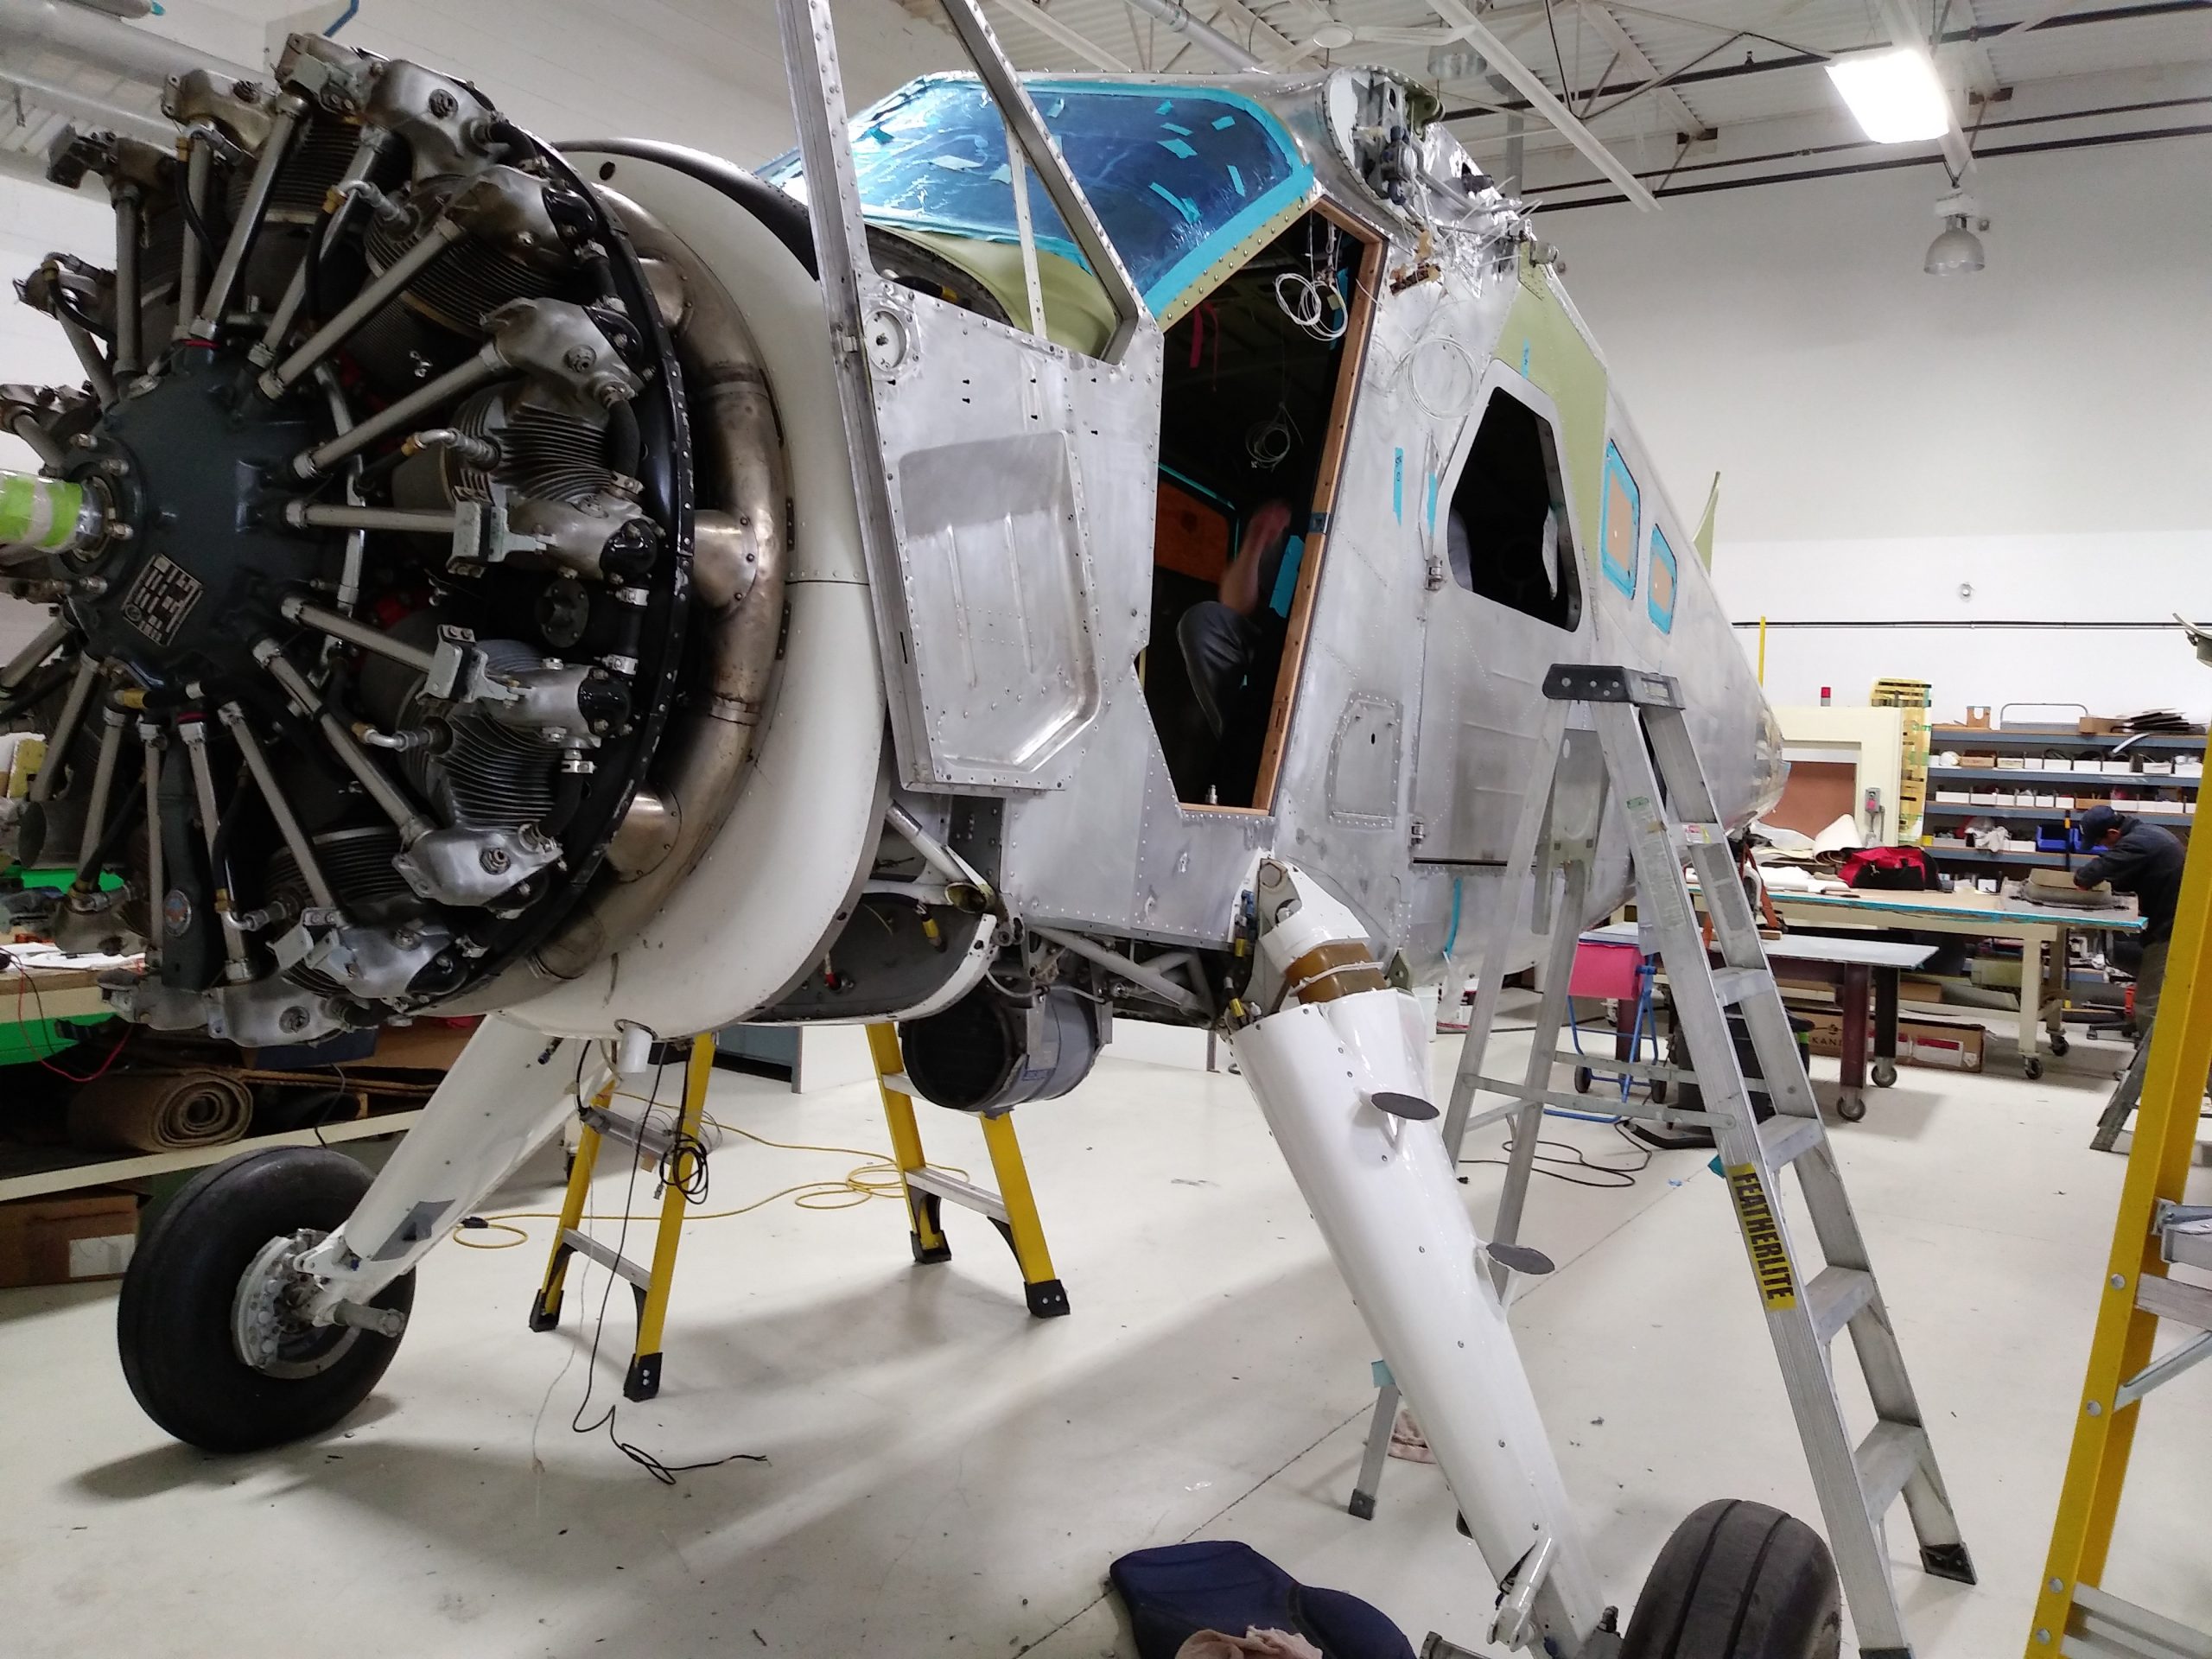 The Beaver Undergoing Maintenance with the Wings and Cowling Removed, After the Paint was Stripped